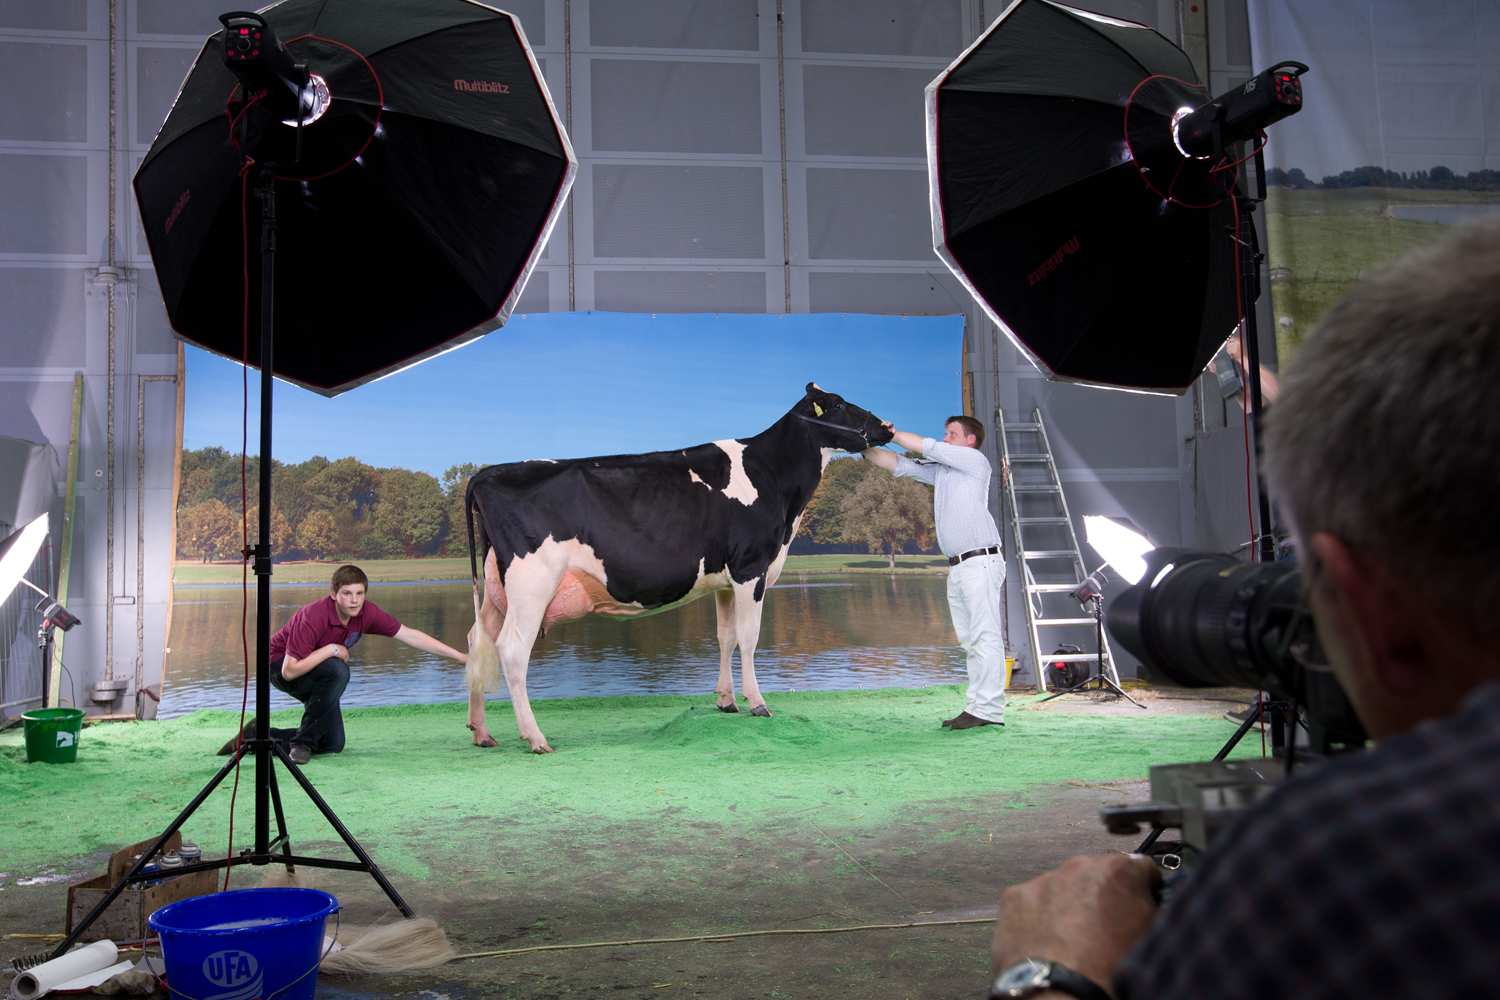 Cows compete in 'Miss Germany' Holstein cow show